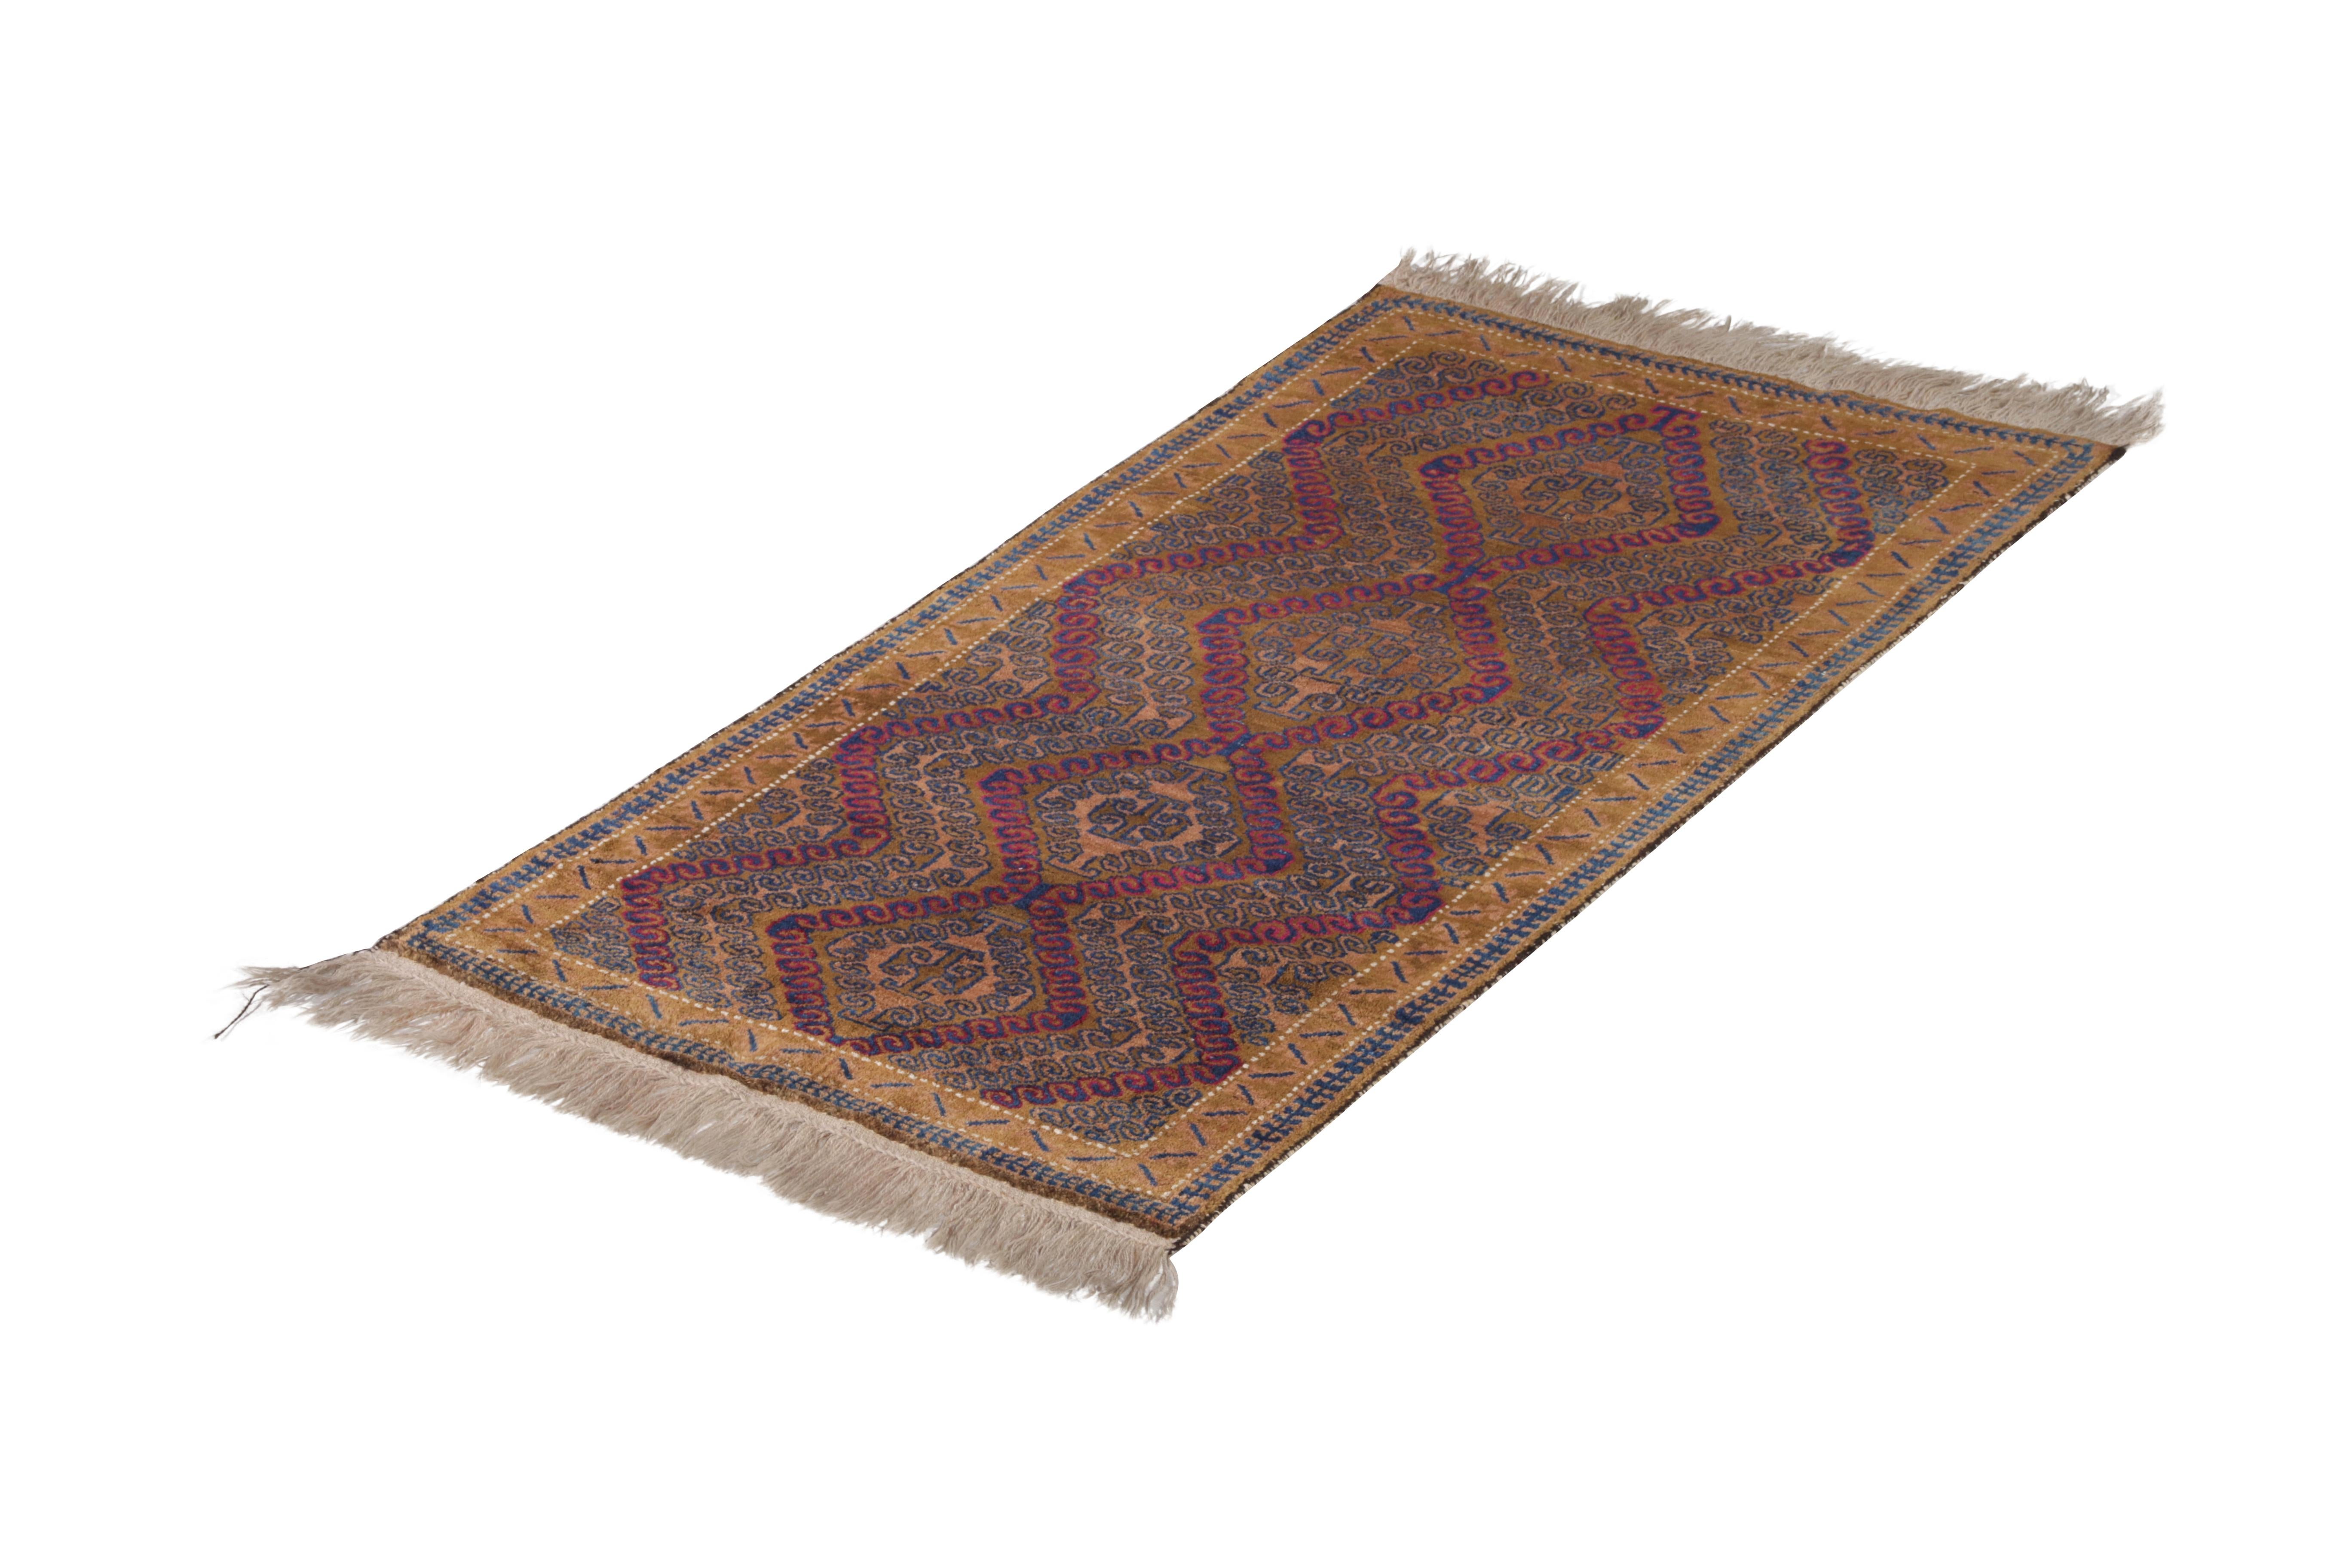 Hand knotted in wool originating between 1950-1960, this vintage Persian rug enjoys both an astutely preserved quality wool and one of the most uniquely intricate plays of geometry through color among this tribal rug collection, connoting a